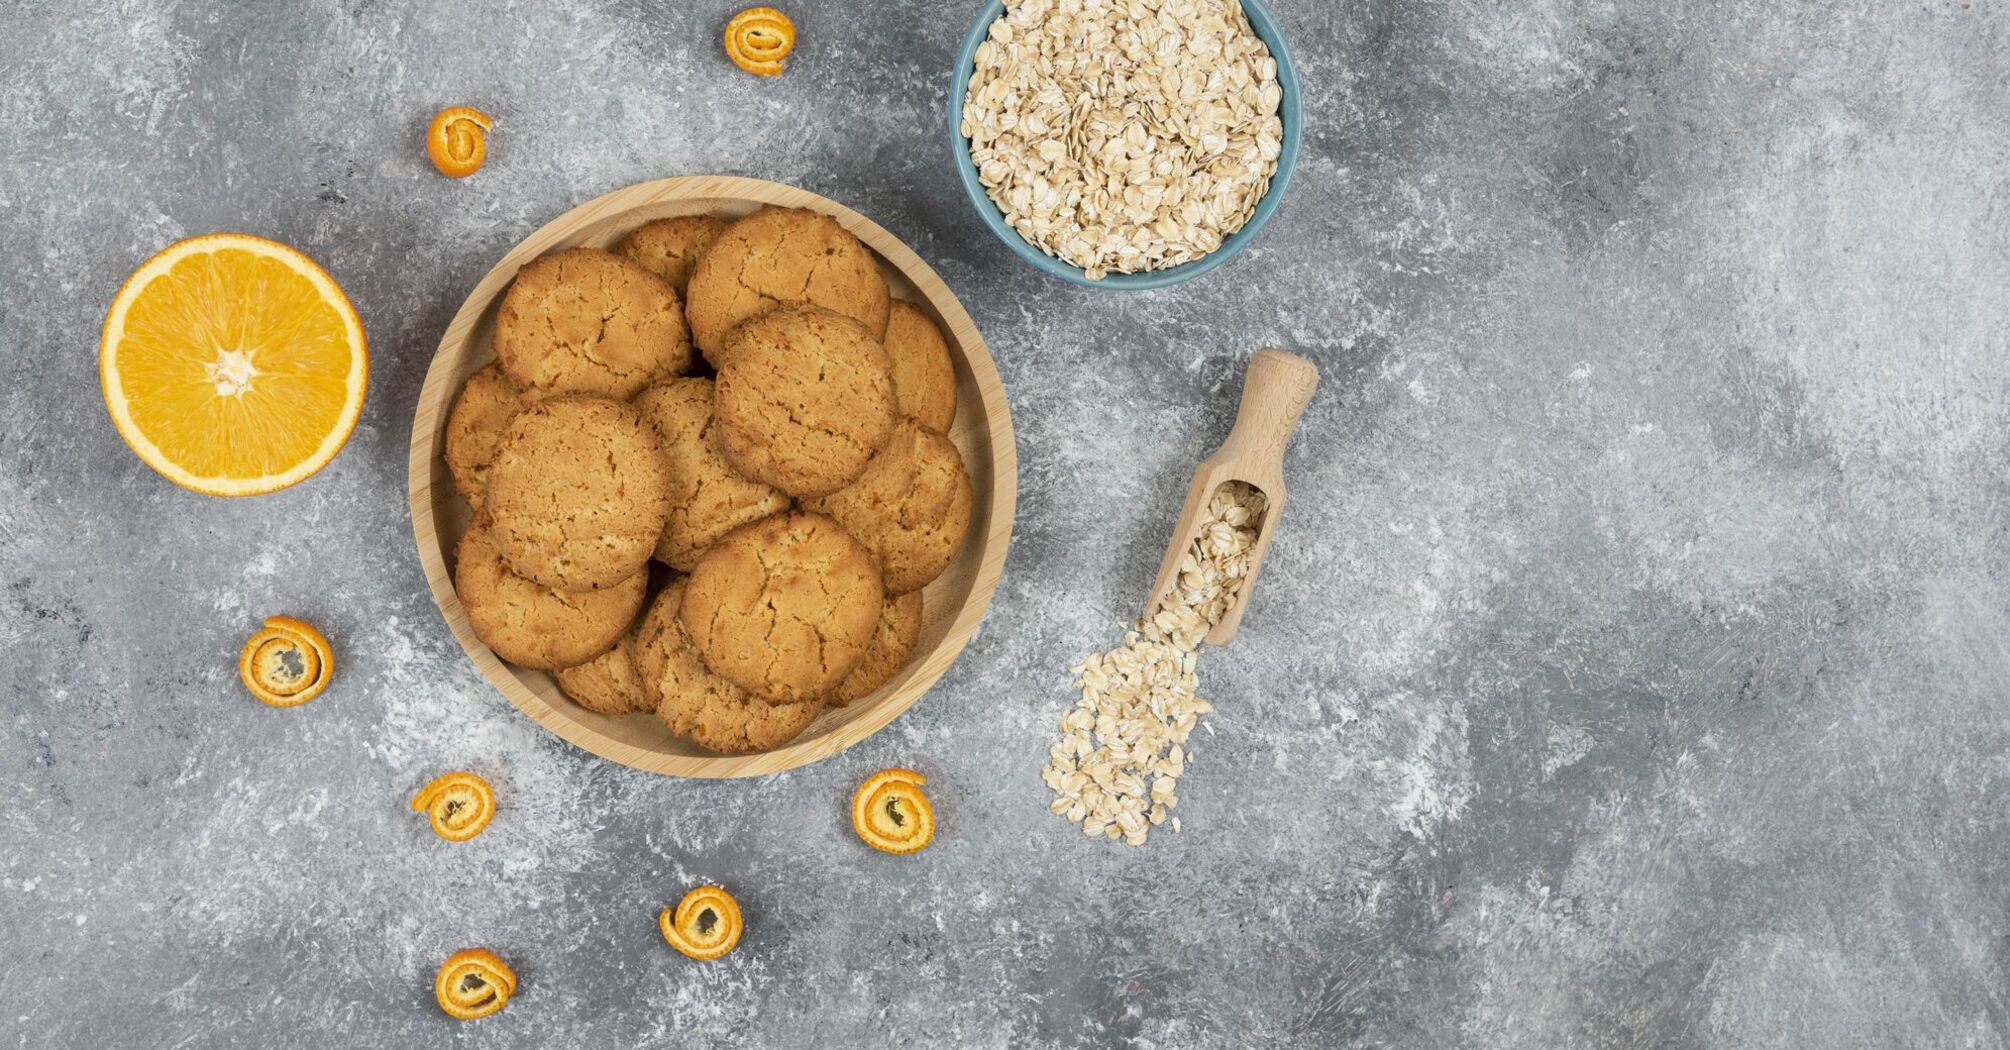 The most delicious oatmeal cookies: ready in 15 minutes